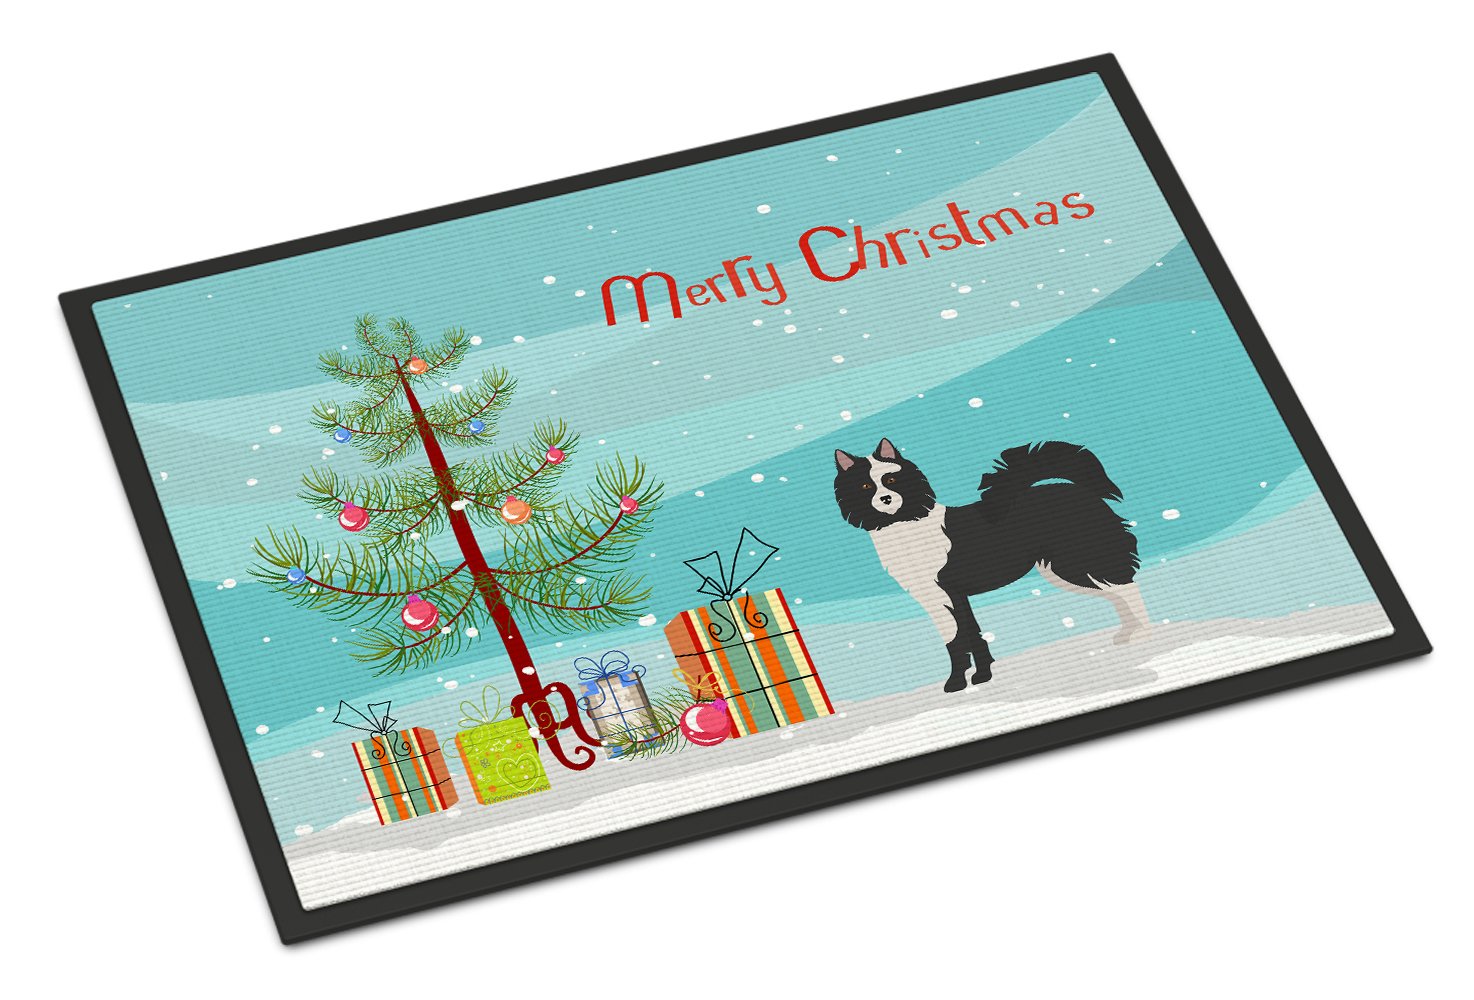 Black and White Elo dog Christmas Tree Indoor or Outdoor Mat 24x36 CK3452JMAT by Caroline's Treasures